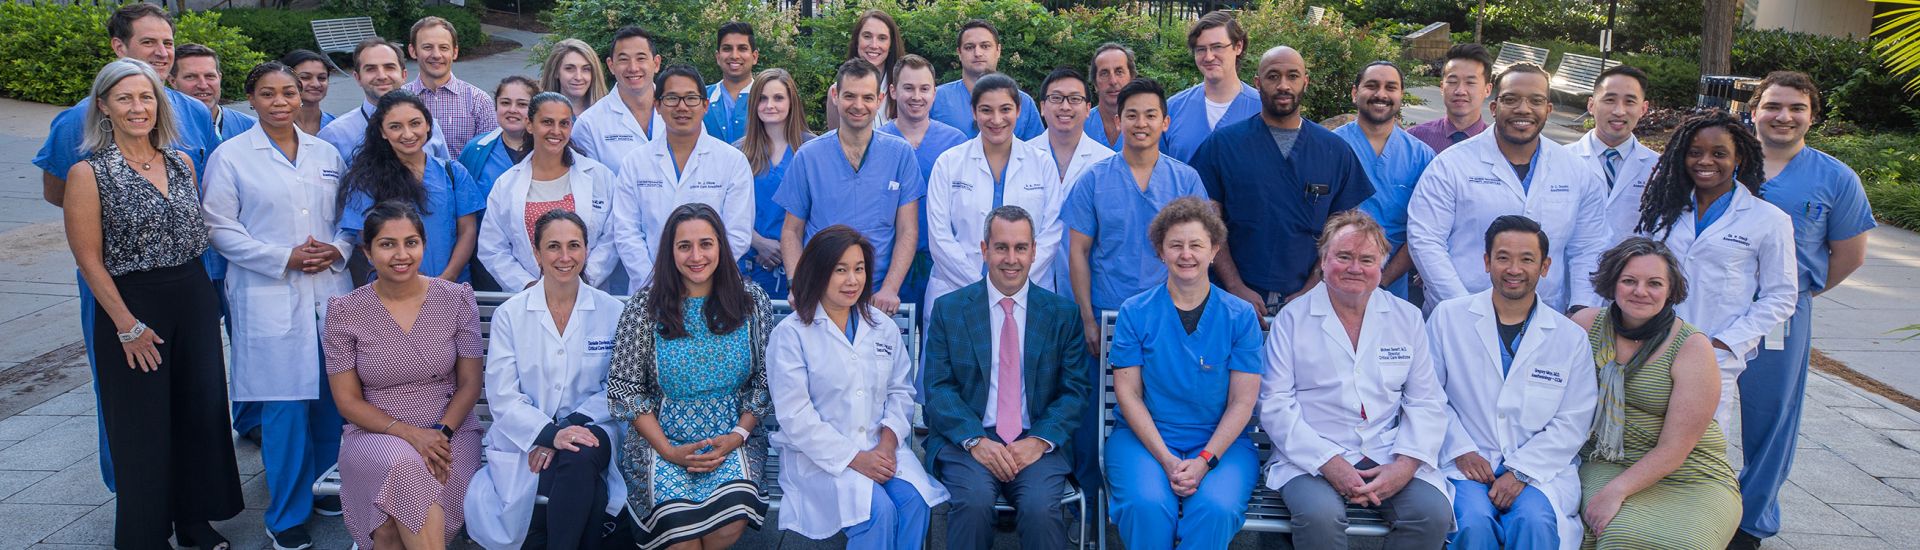 Members of the anesthesiology department 